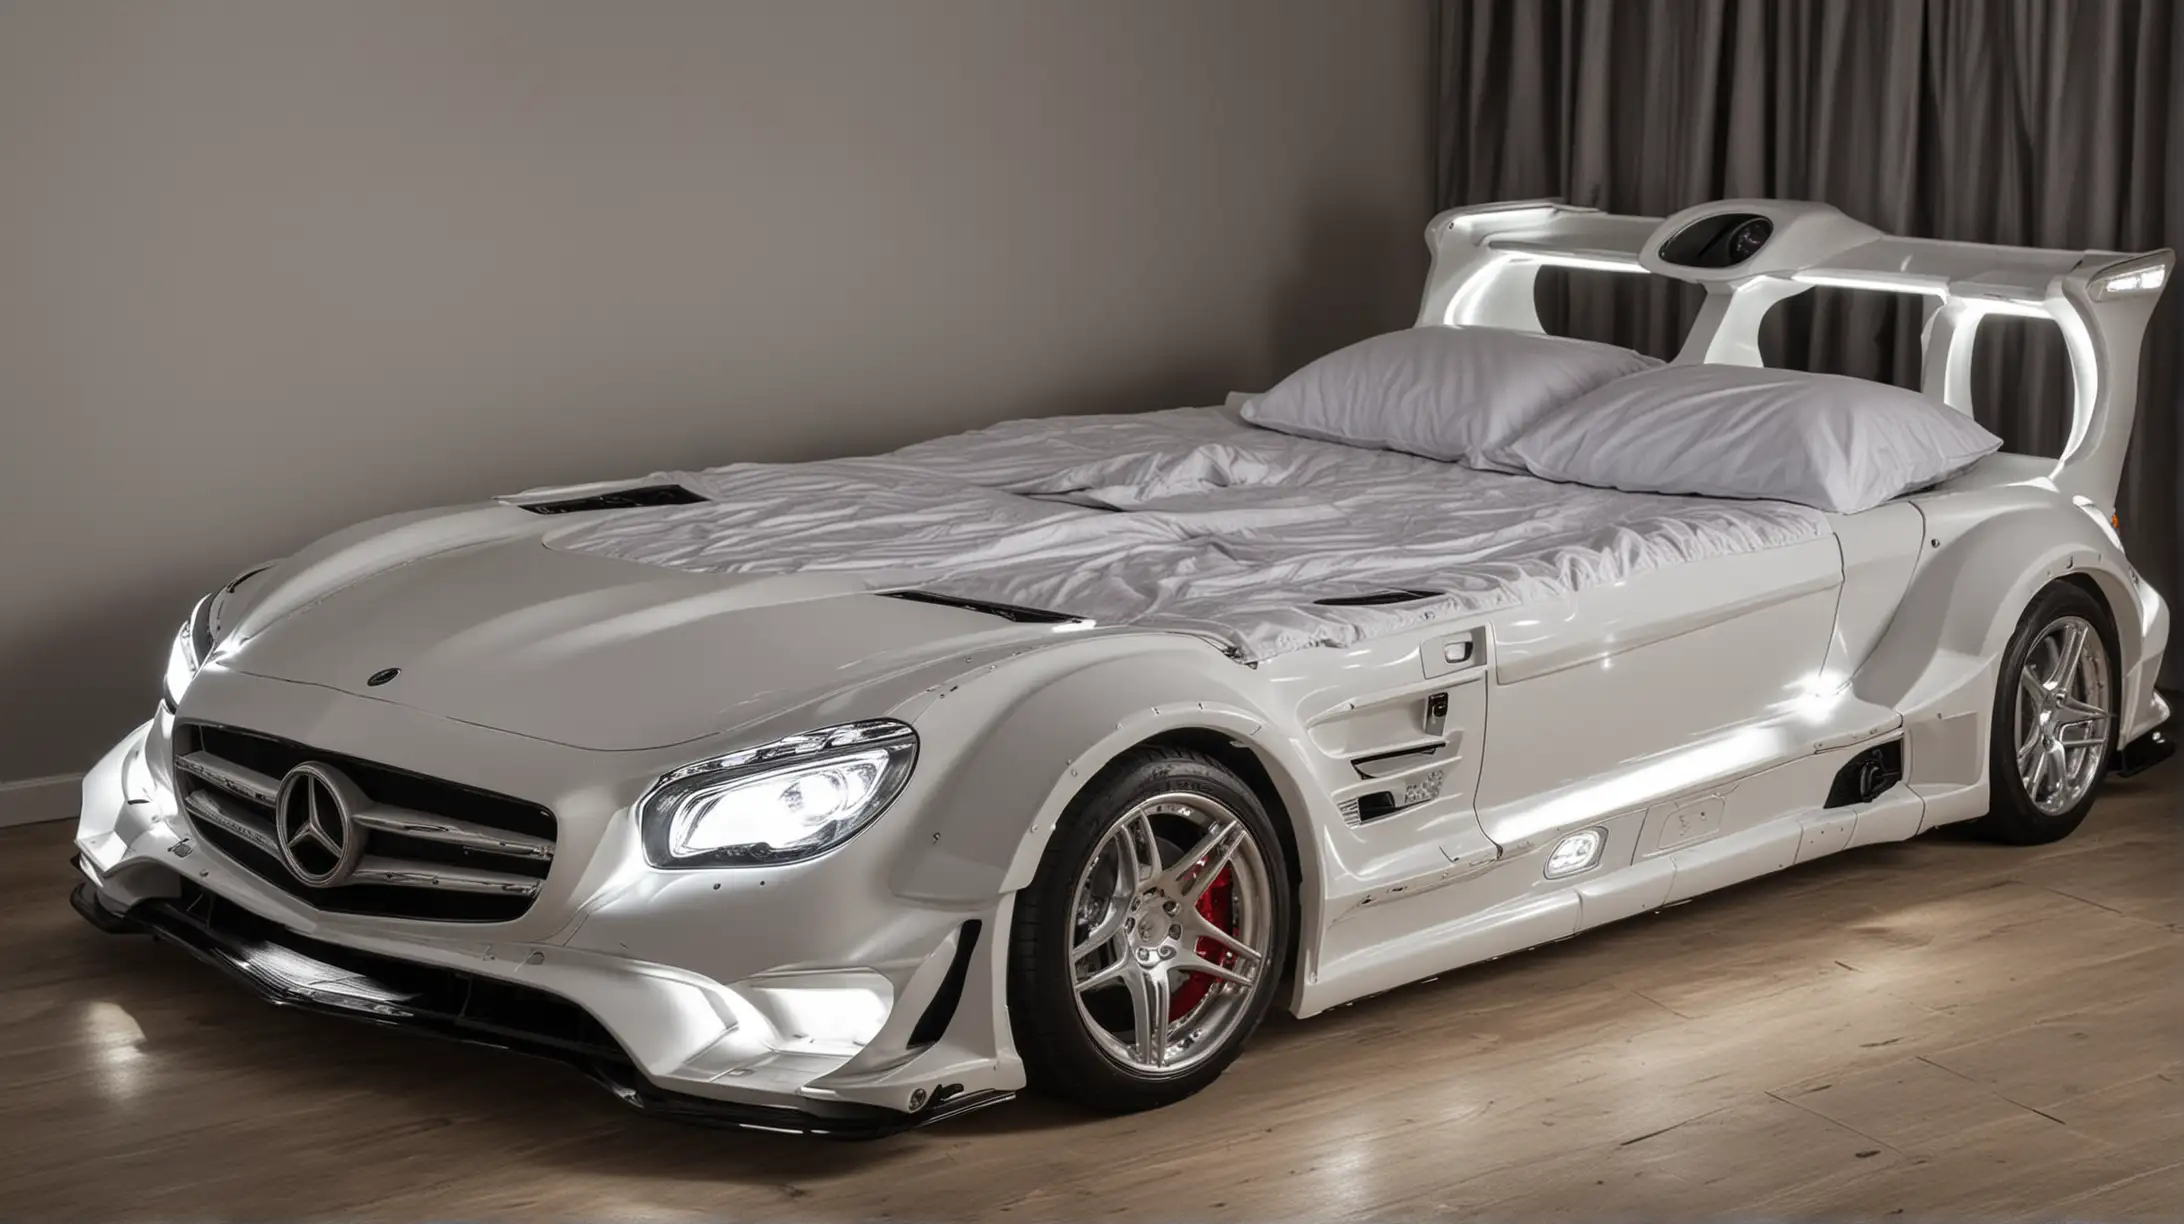 Luxury Double Bed Shaped Like Mercedes AMG Car with Headlights On